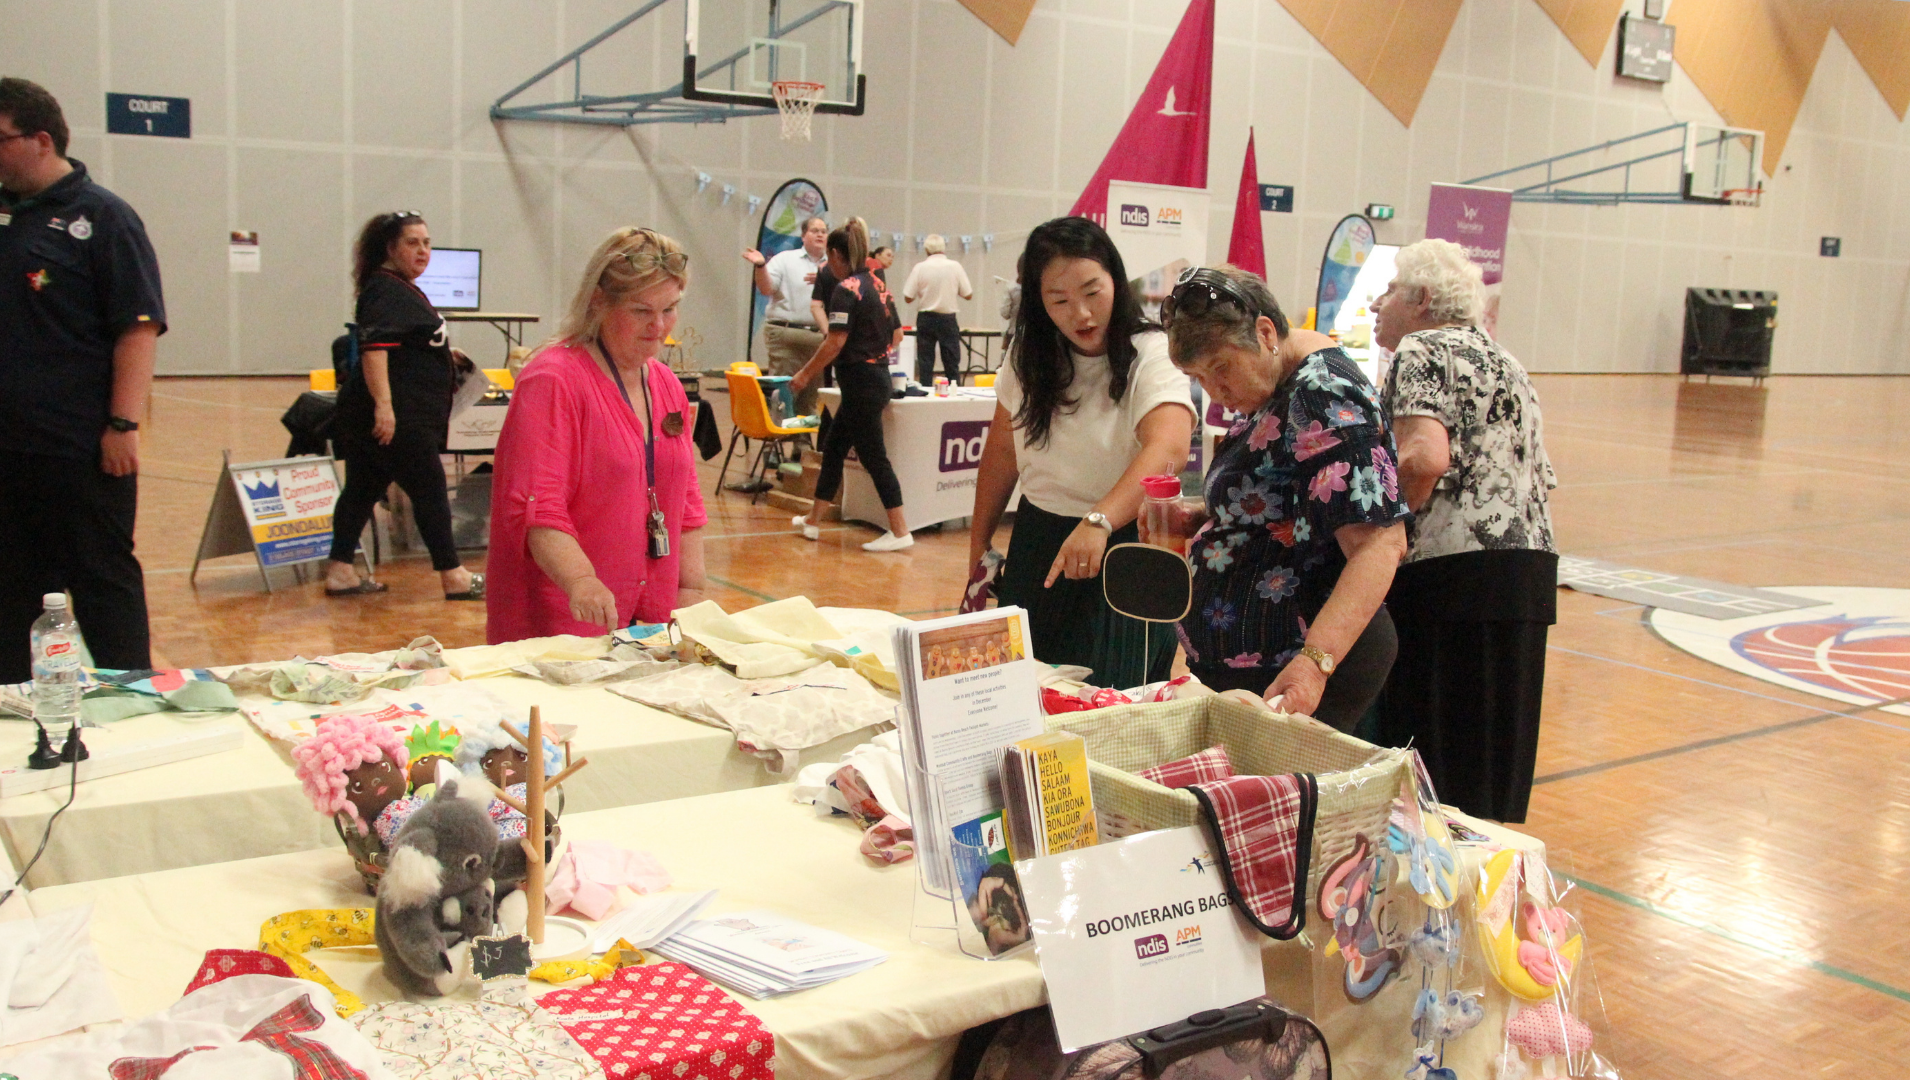 Attendees at the APM communities event admiring some of the items on display